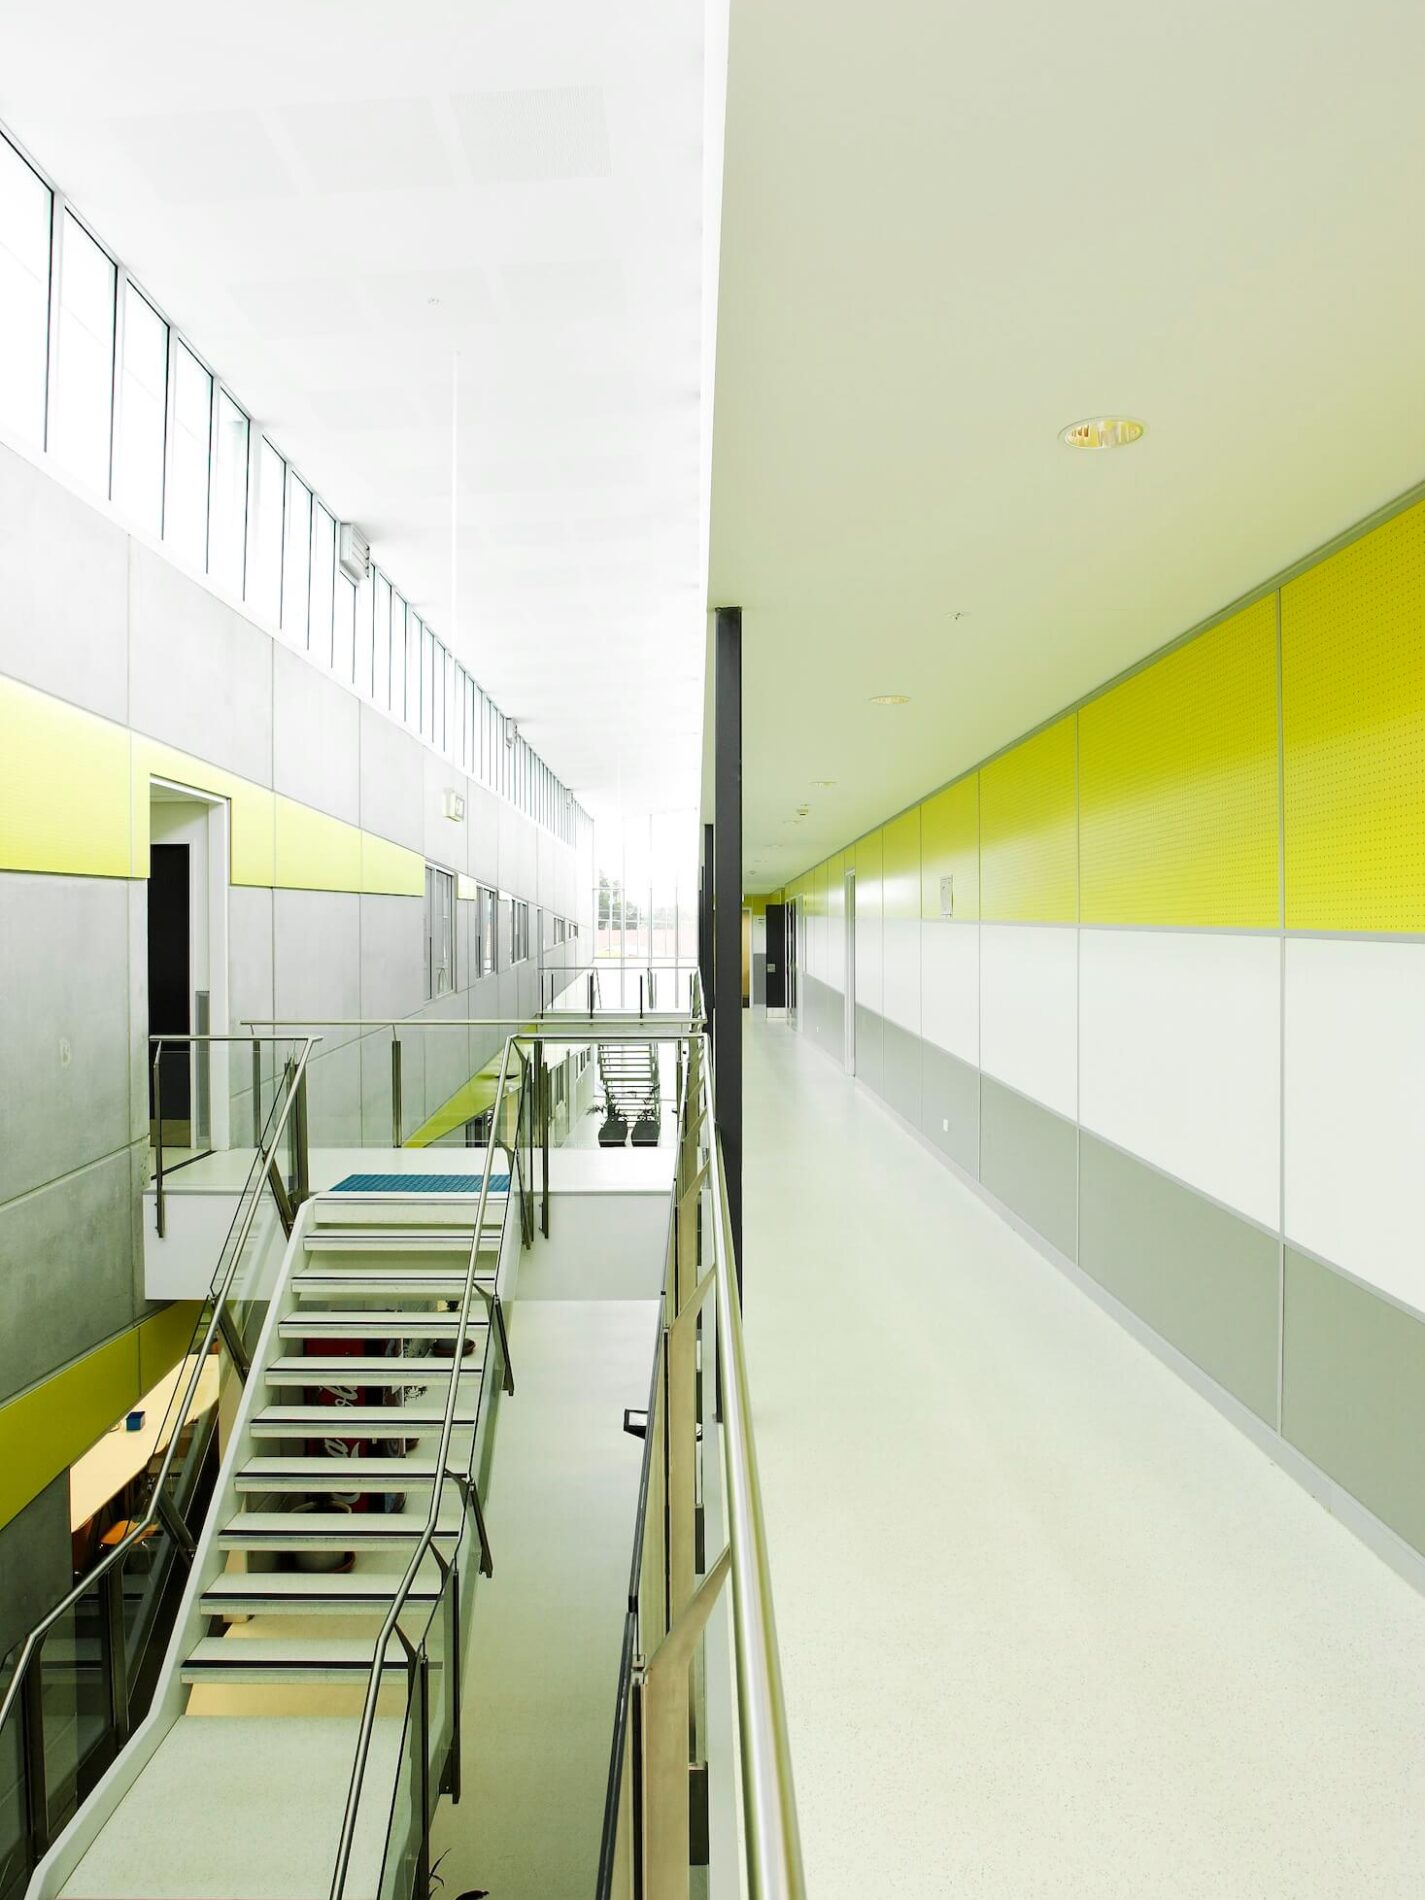 Hallway view within police station, brightly lit from double height void over internal staircase, yellow panelling on walls